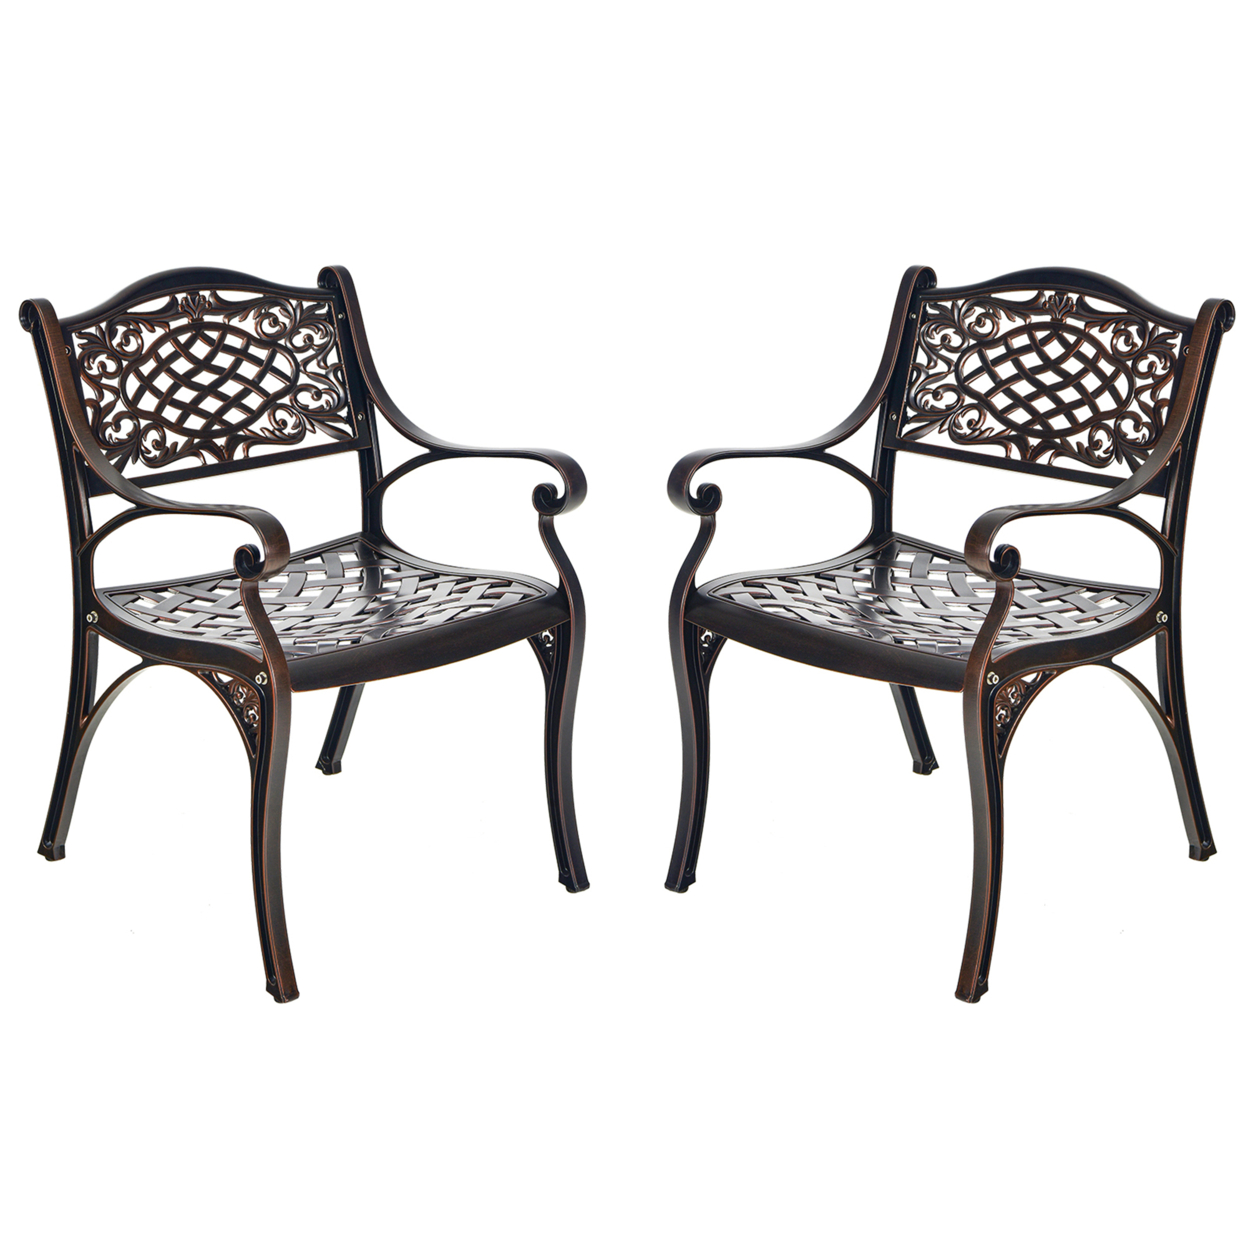 Set Of 2 Outdoor Dining Chairs Cast Aluminum Patio Bistro Chairs Armchairs